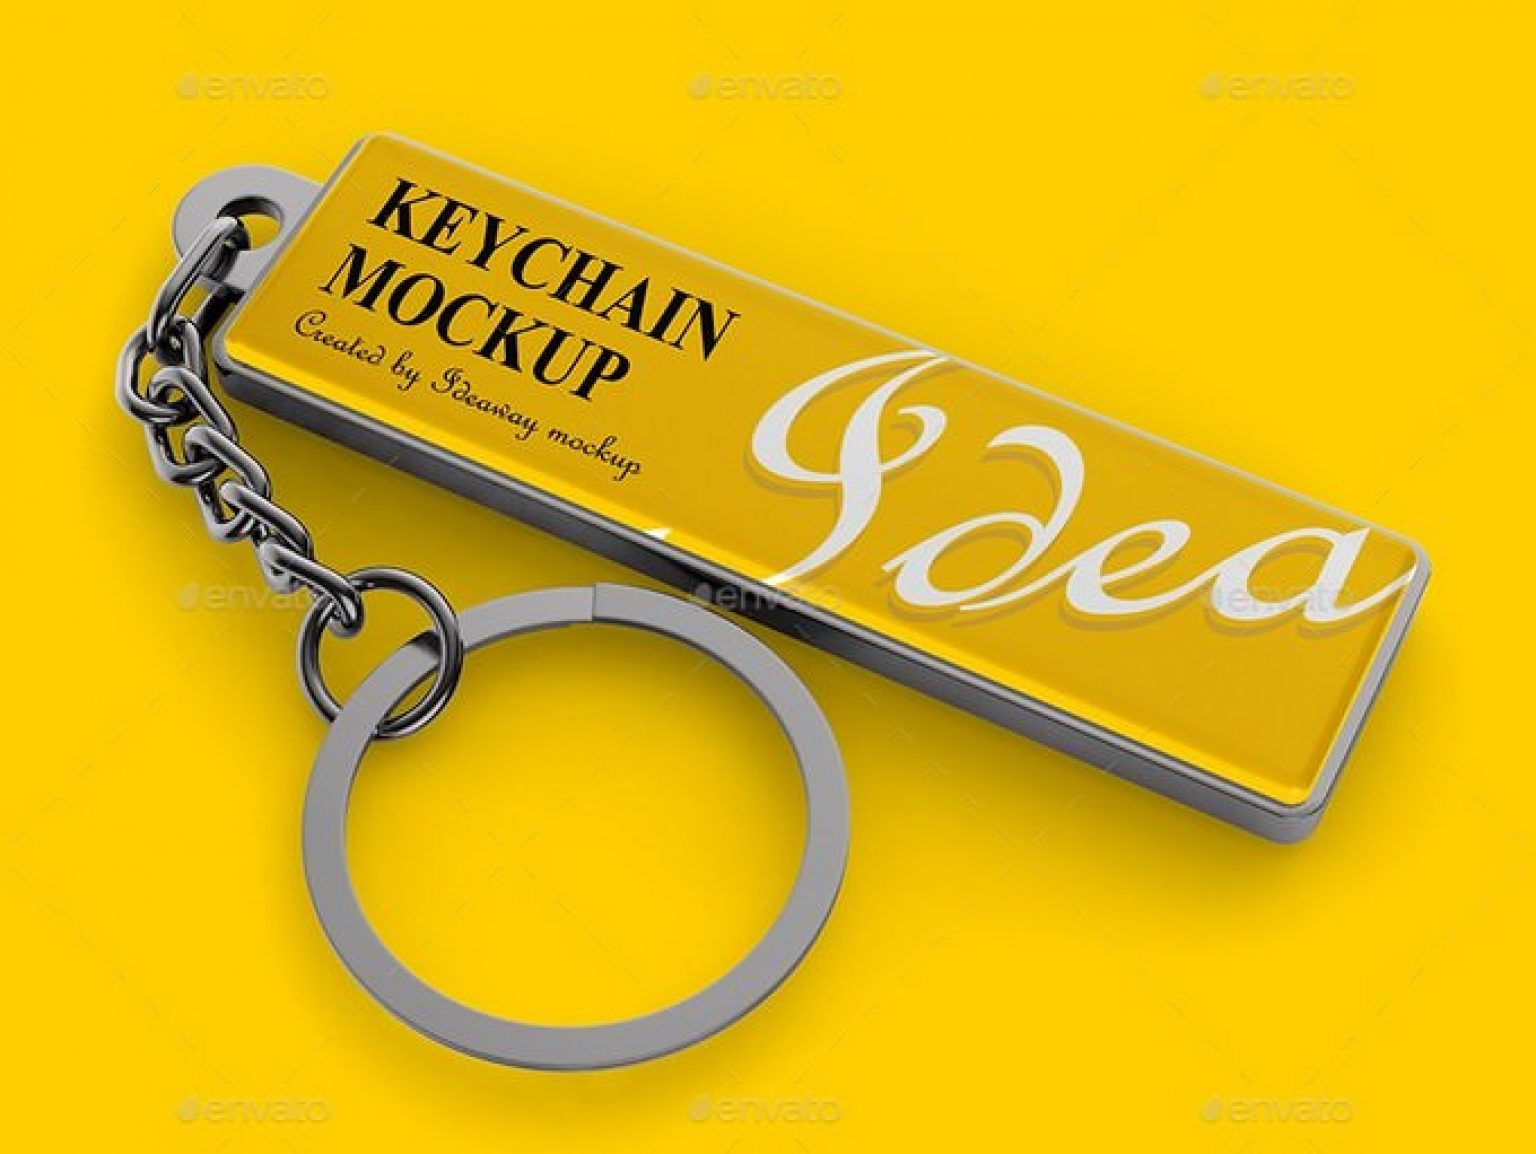 30+ Best Keychain Mockup PSD Templates - Templatefor